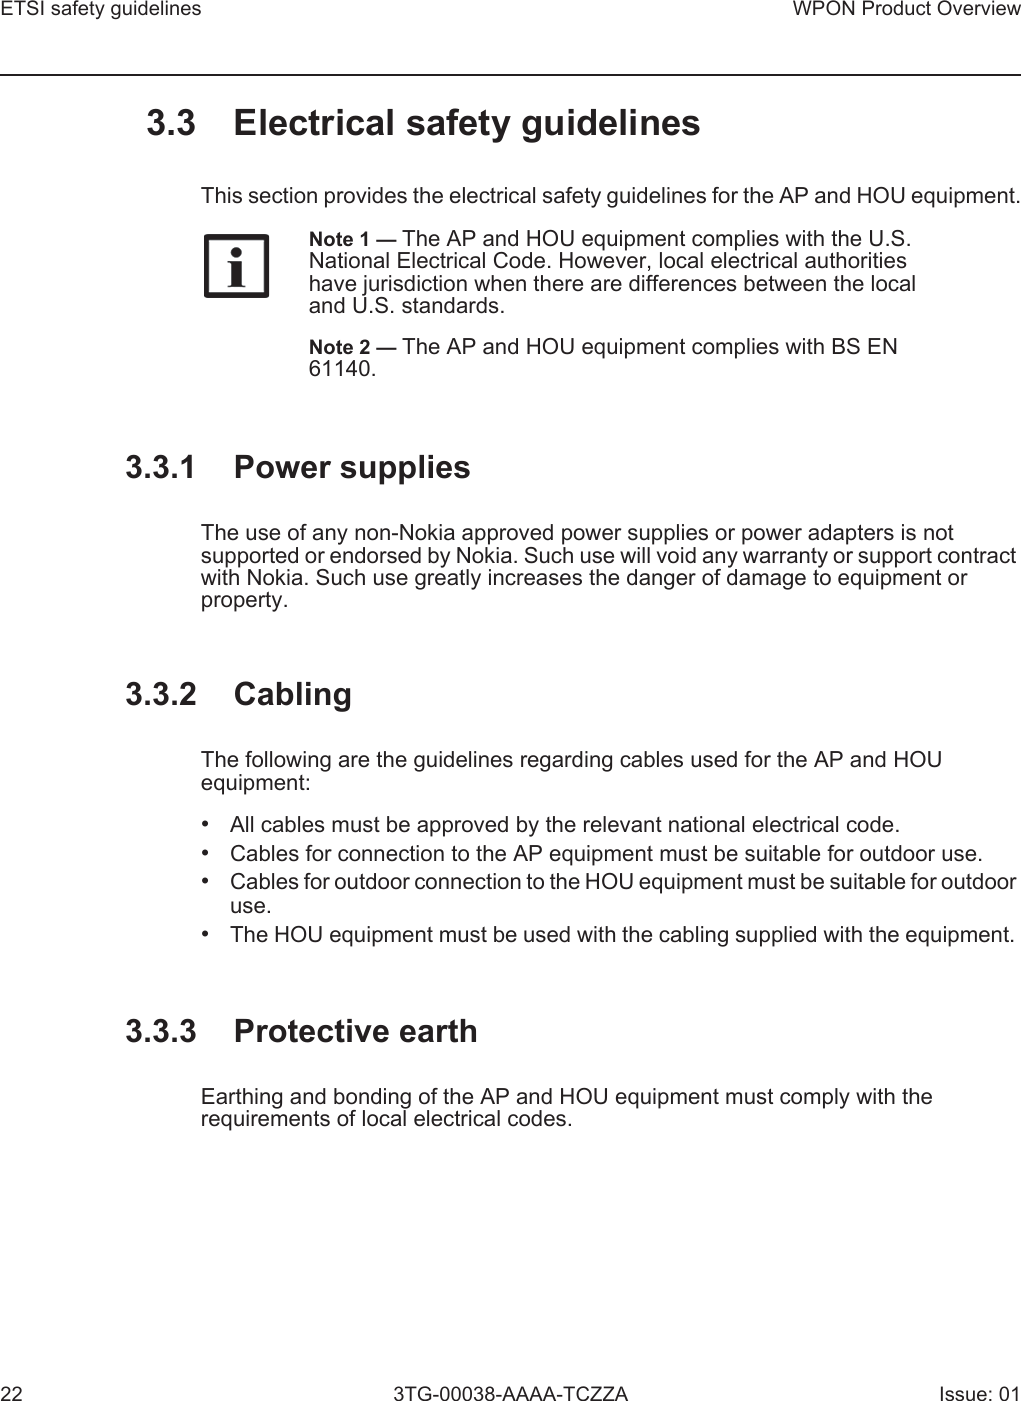 ETSI safety guidelines22WPON Product Overview3TG-00038-AAAA-TCZZA Issue: 013.3 Electrical safety guidelinesThis section provides the electrical safety guidelines for the AP and HOU equipment.3.3.1 Power suppliesThe use of any non-Nokia approved power supplies or power adapters is not supported or endorsed by Nokia. Such use will void any warranty or support contract with Nokia. Such use greatly increases the danger of damage to equipment or property.3.3.2 CablingThe following are the guidelines regarding cables used for the AP and HOU equipment:•All cables must be approved by the relevant national electrical code.•Cables for connection to the AP equipment must be suitable for outdoor use.•Cables for outdoor connection to the HOU equipment must be suitable for outdooruse.•The HOU equipment must be used with the cabling supplied with the equipment.3.3.3 Protective earthEarthing and bonding of the AP and HOU equipment must comply with the requirements of local electrical codes.Note 1 — The AP and HOU equipment complies with the U.S. National Electrical Code. However, local electrical authorities have jurisdiction when there are differences between the local and U.S. standards.Note 2 — The AP and HOU equipment complies with BS EN 61140.